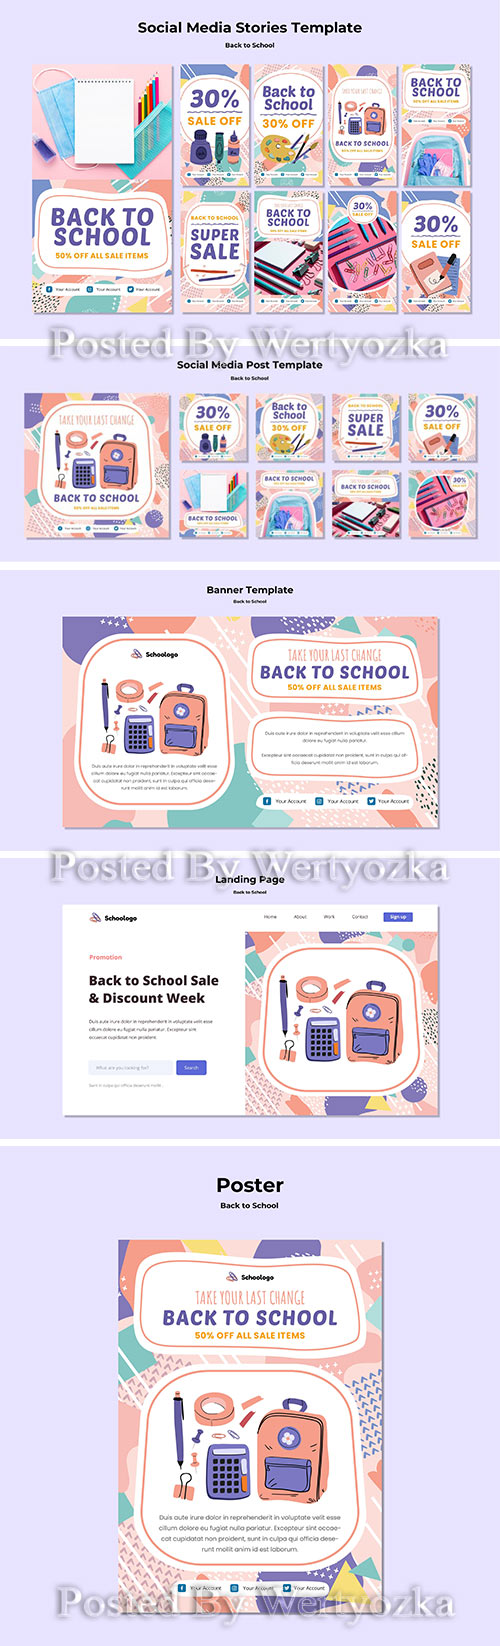 Back to school poster, back to school social media post